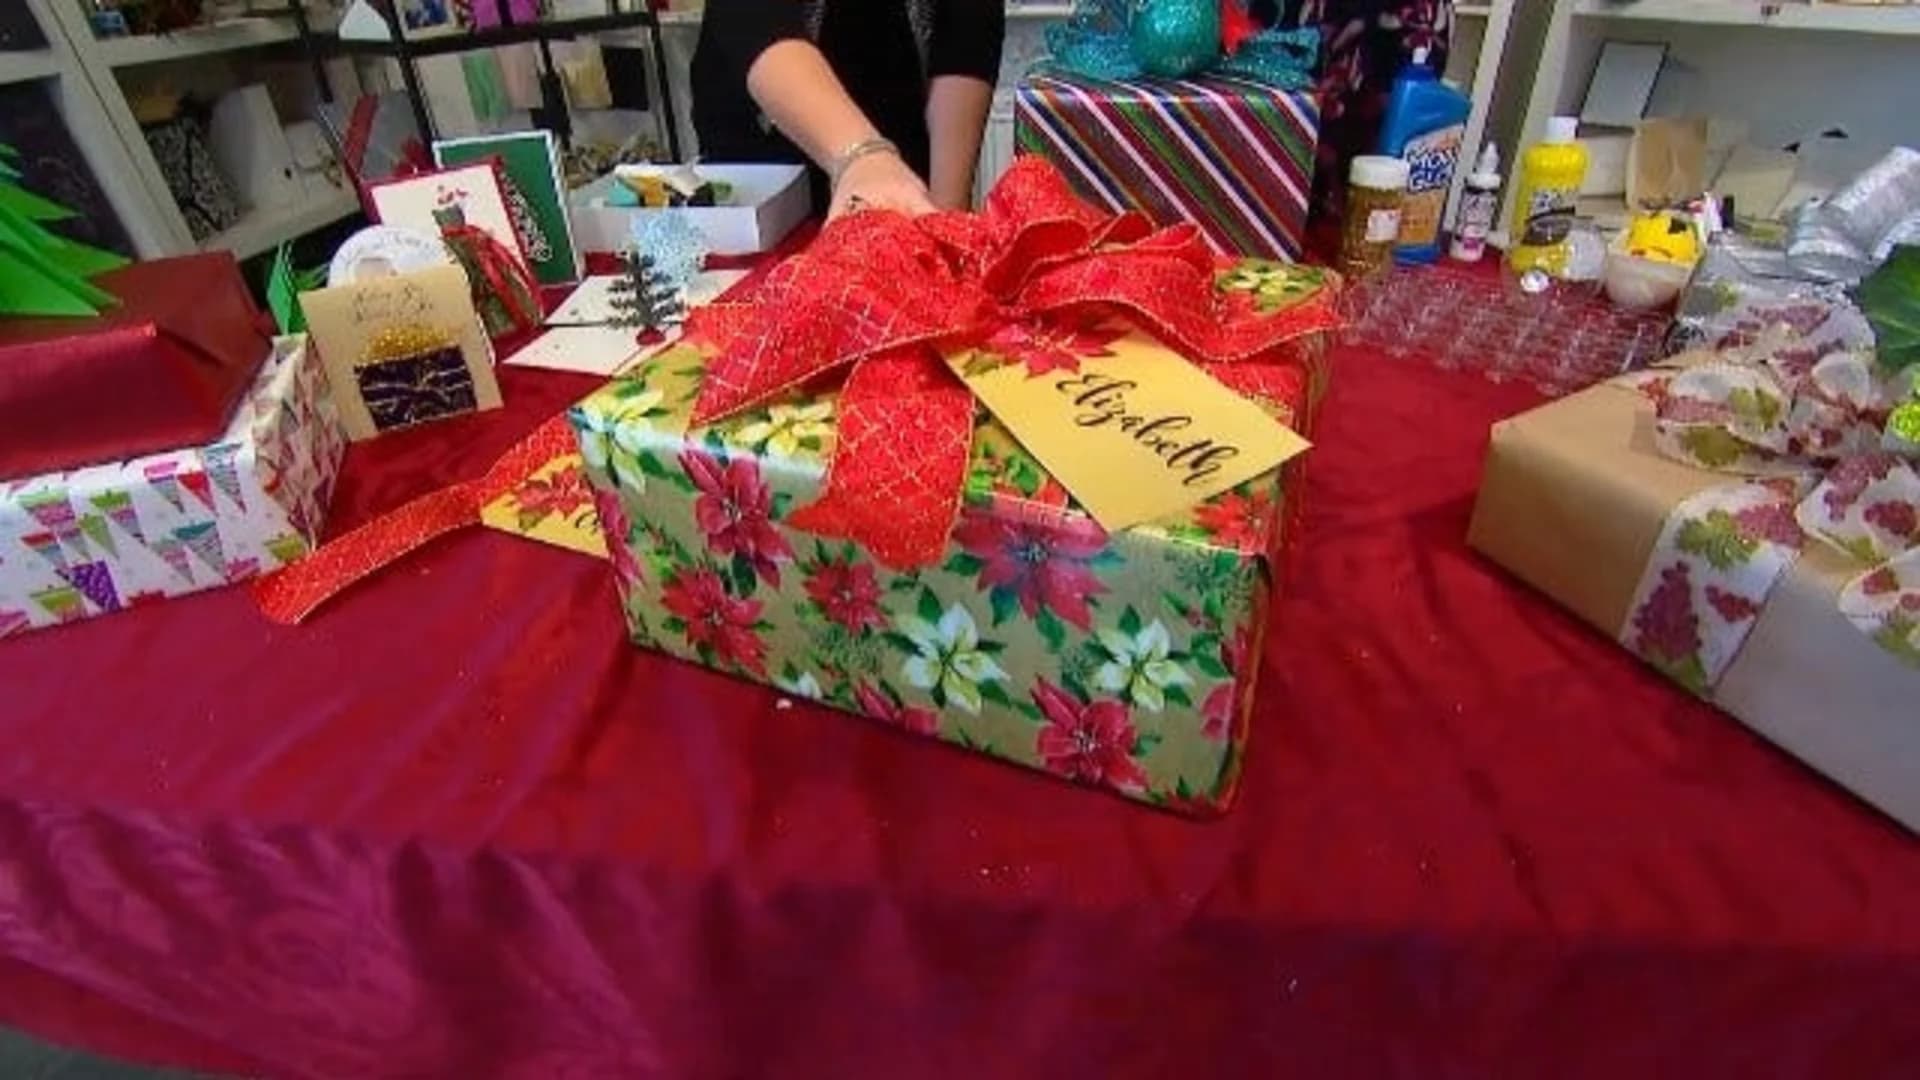 Holiday Help: Gift wrap in style with these simple tips